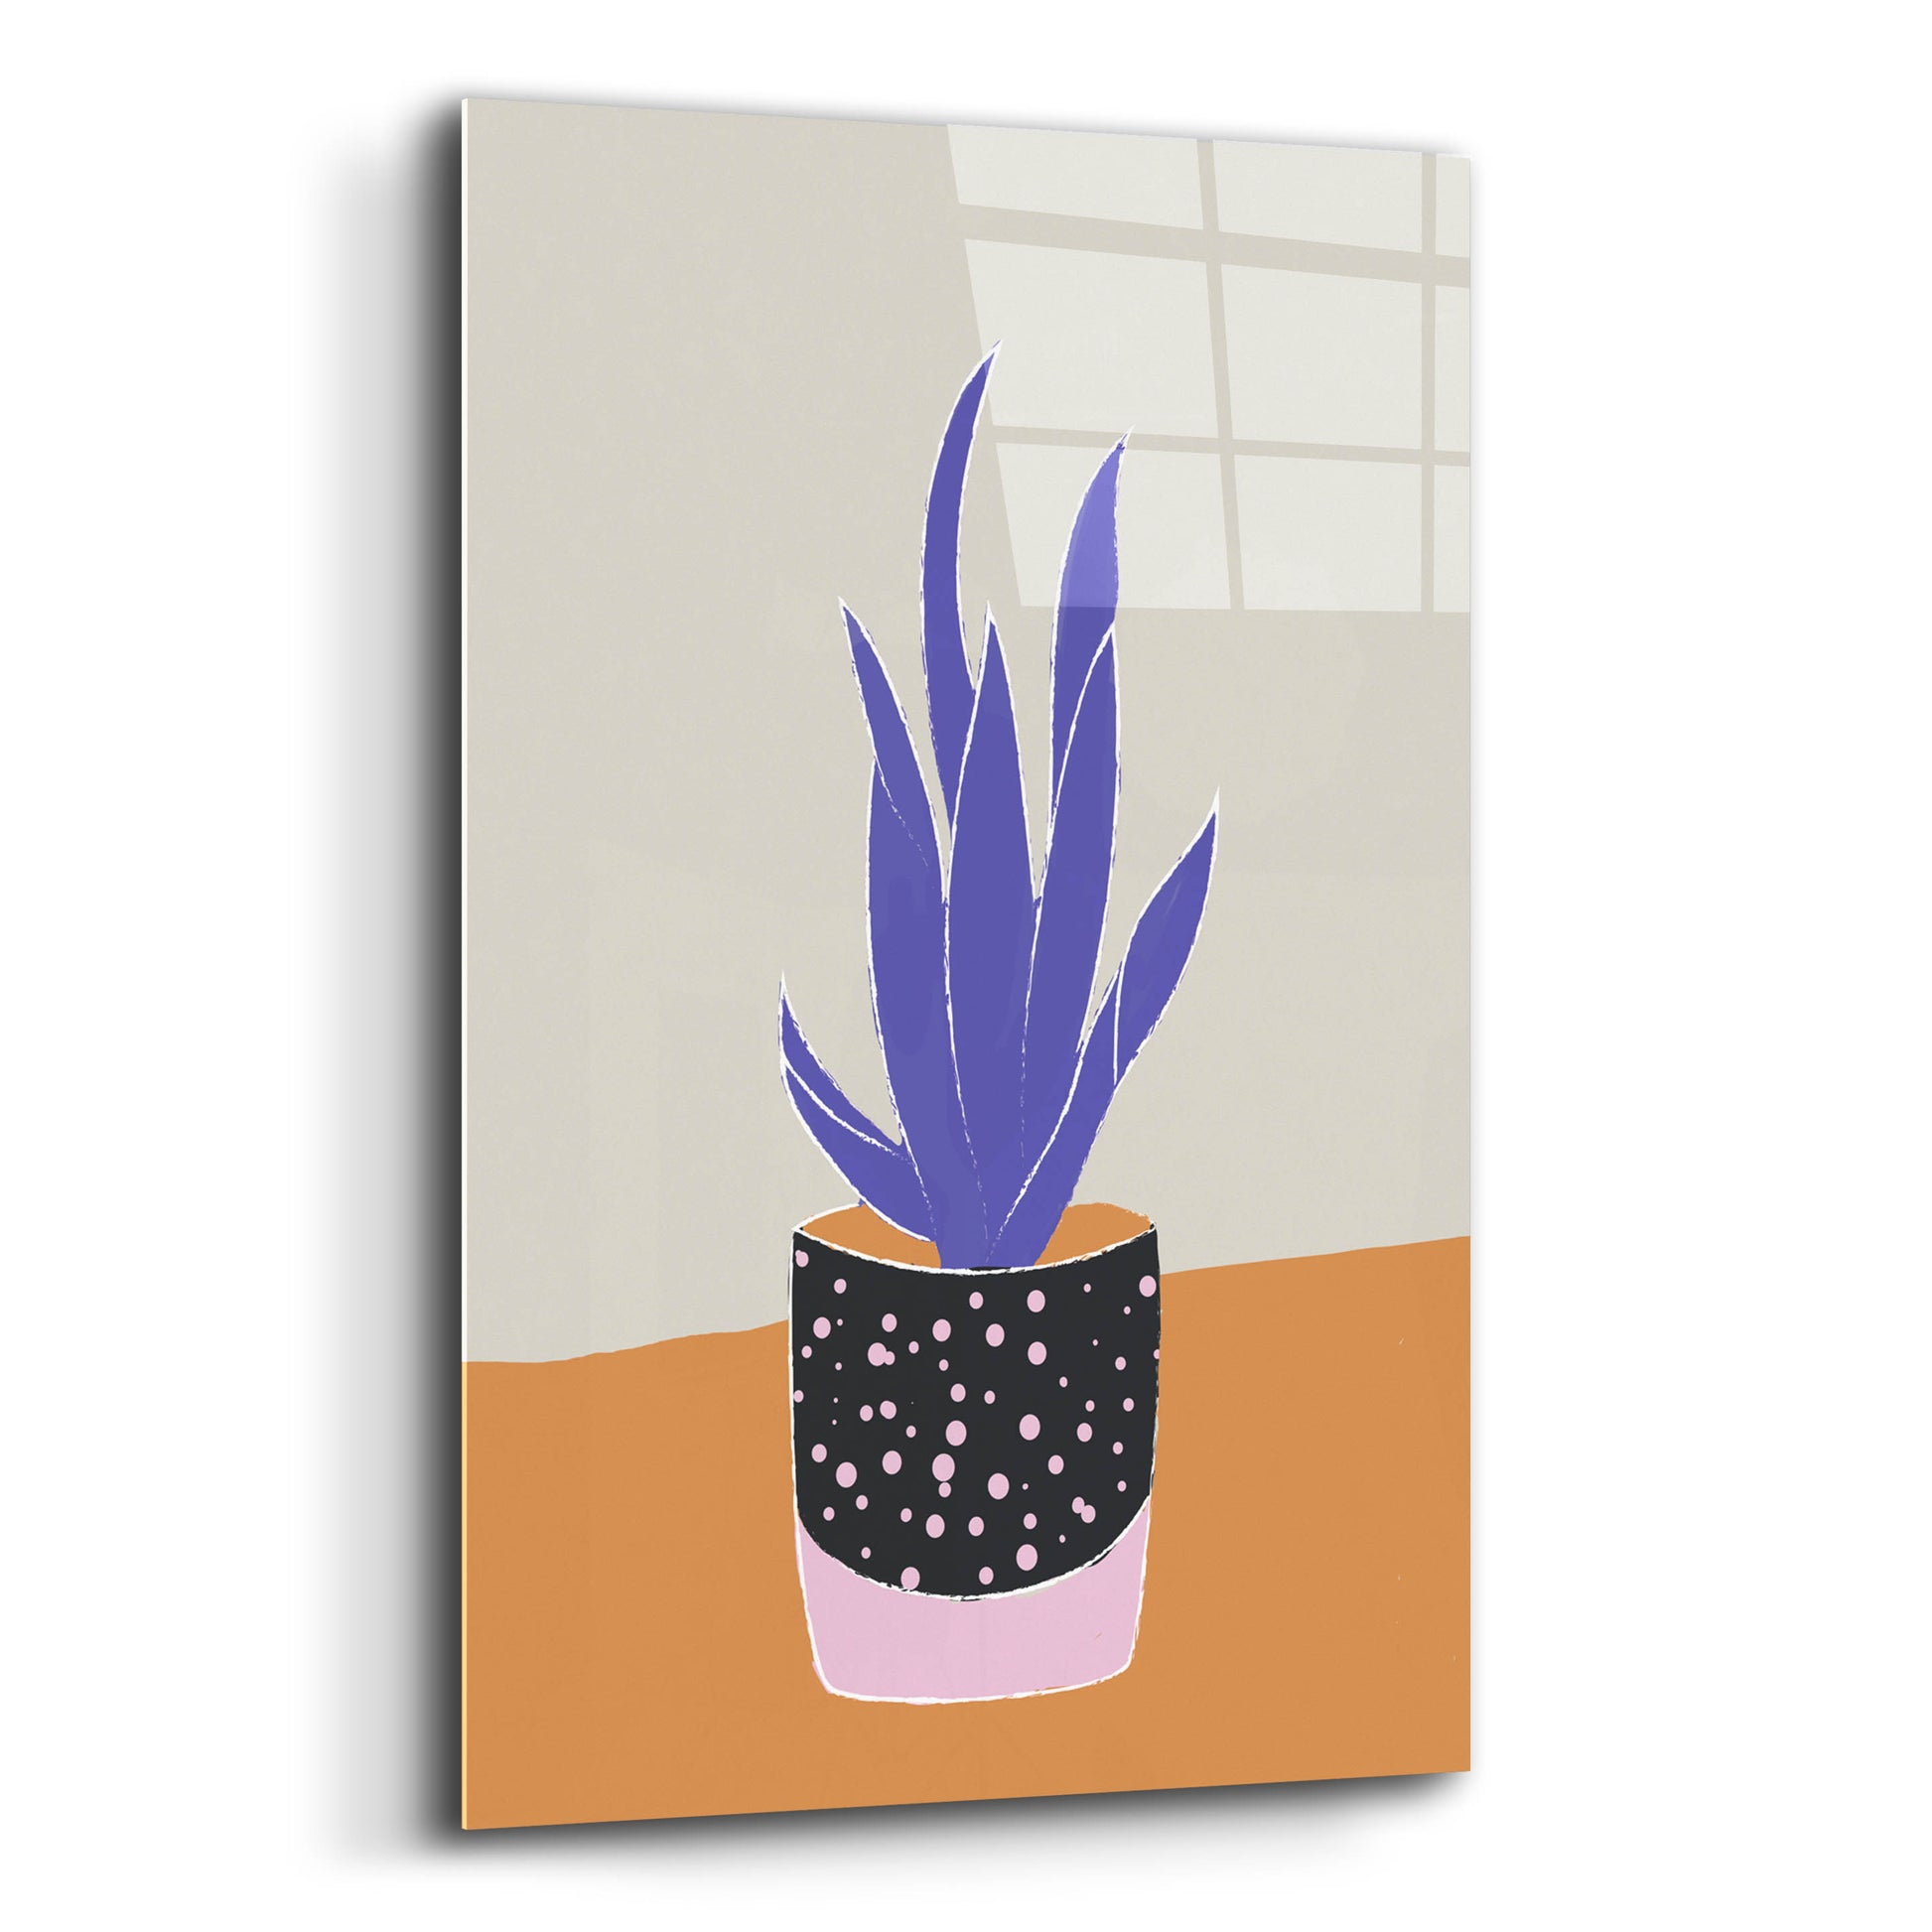 Epic Art 'Tropical Plant On A Pot Hot And Cold Trend' by Sabrina Balbuena, Acrylic Glass Wall Art,12x16